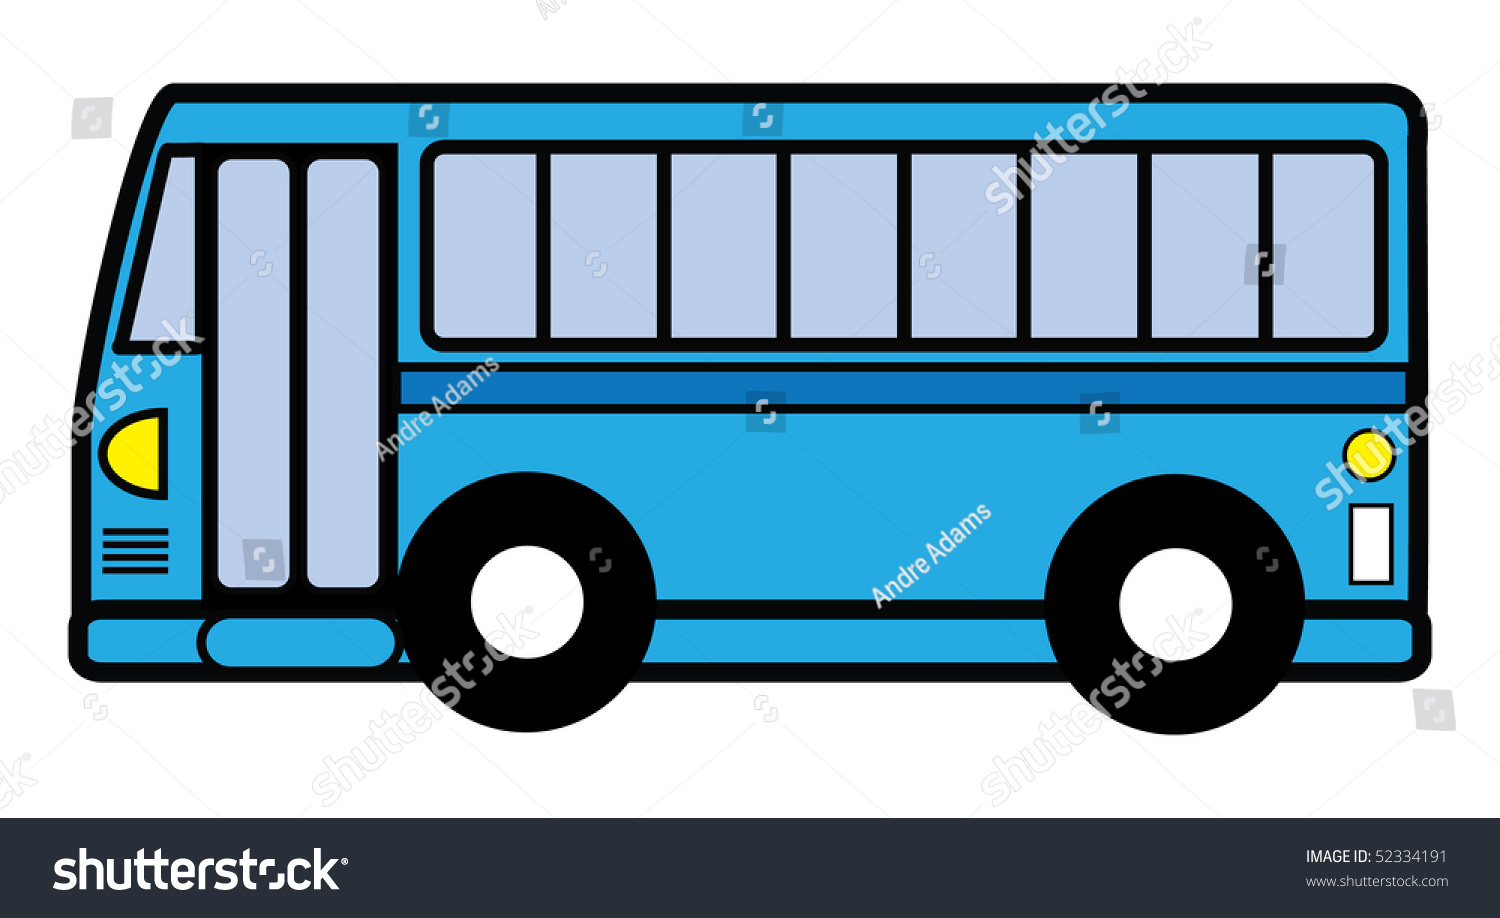 moving bus clipart - photo #47